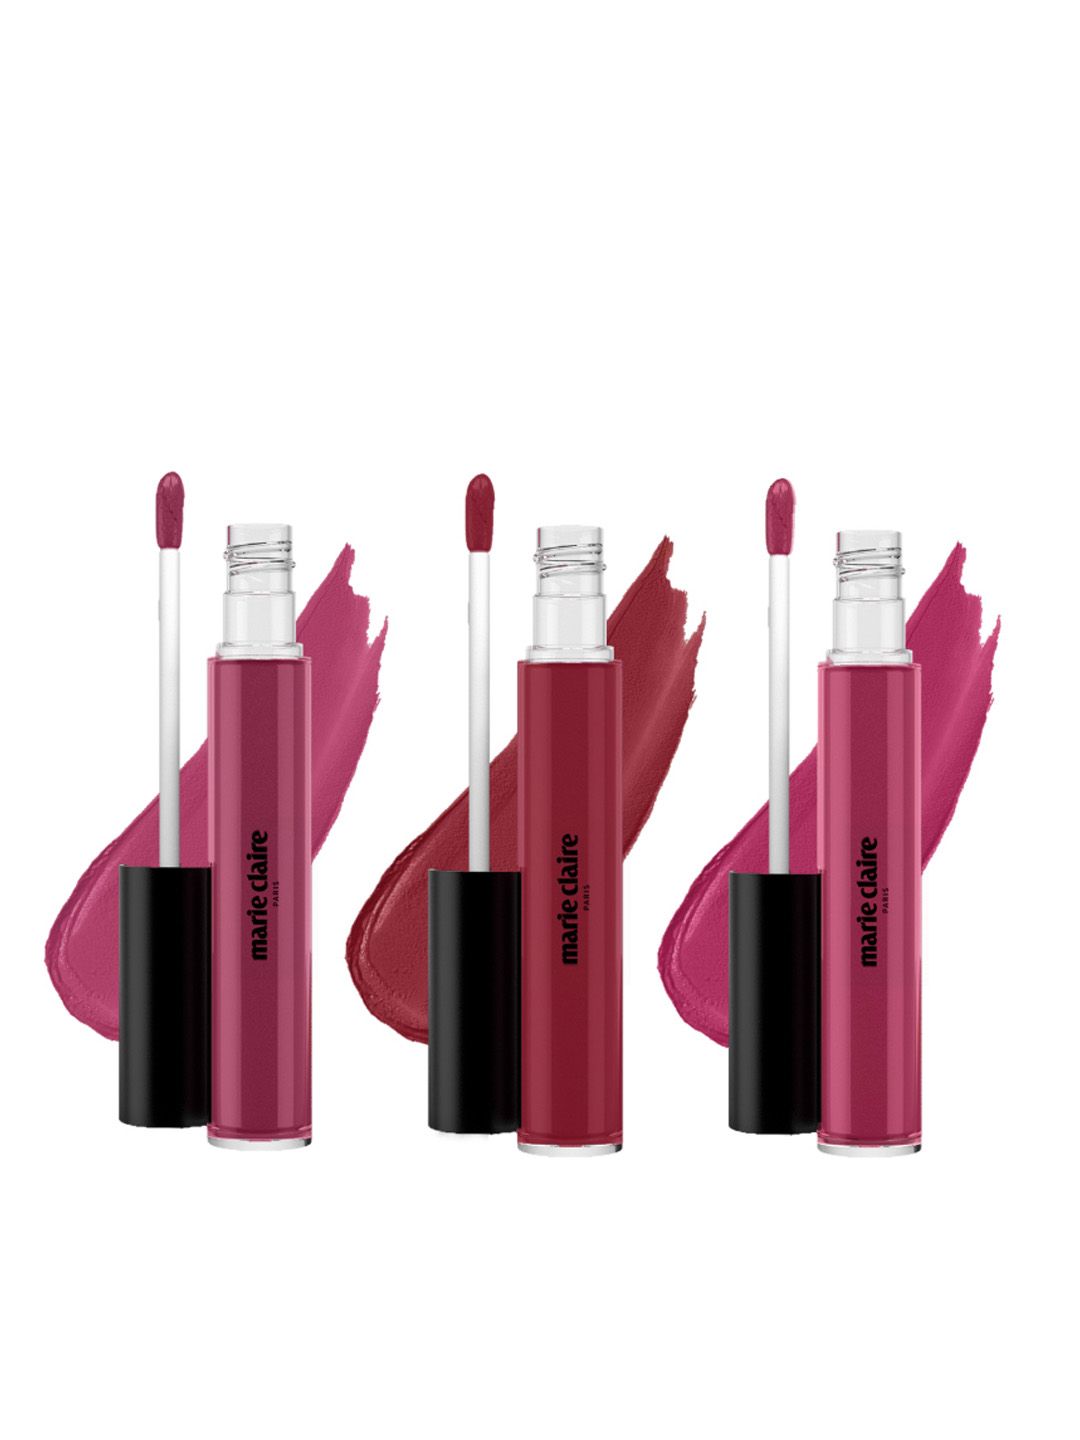 Marie Claire Paris Set of 3 Lip Creme 2.7 g each - Lady Lilac-Bonne Berry & Perky Pink Price in India